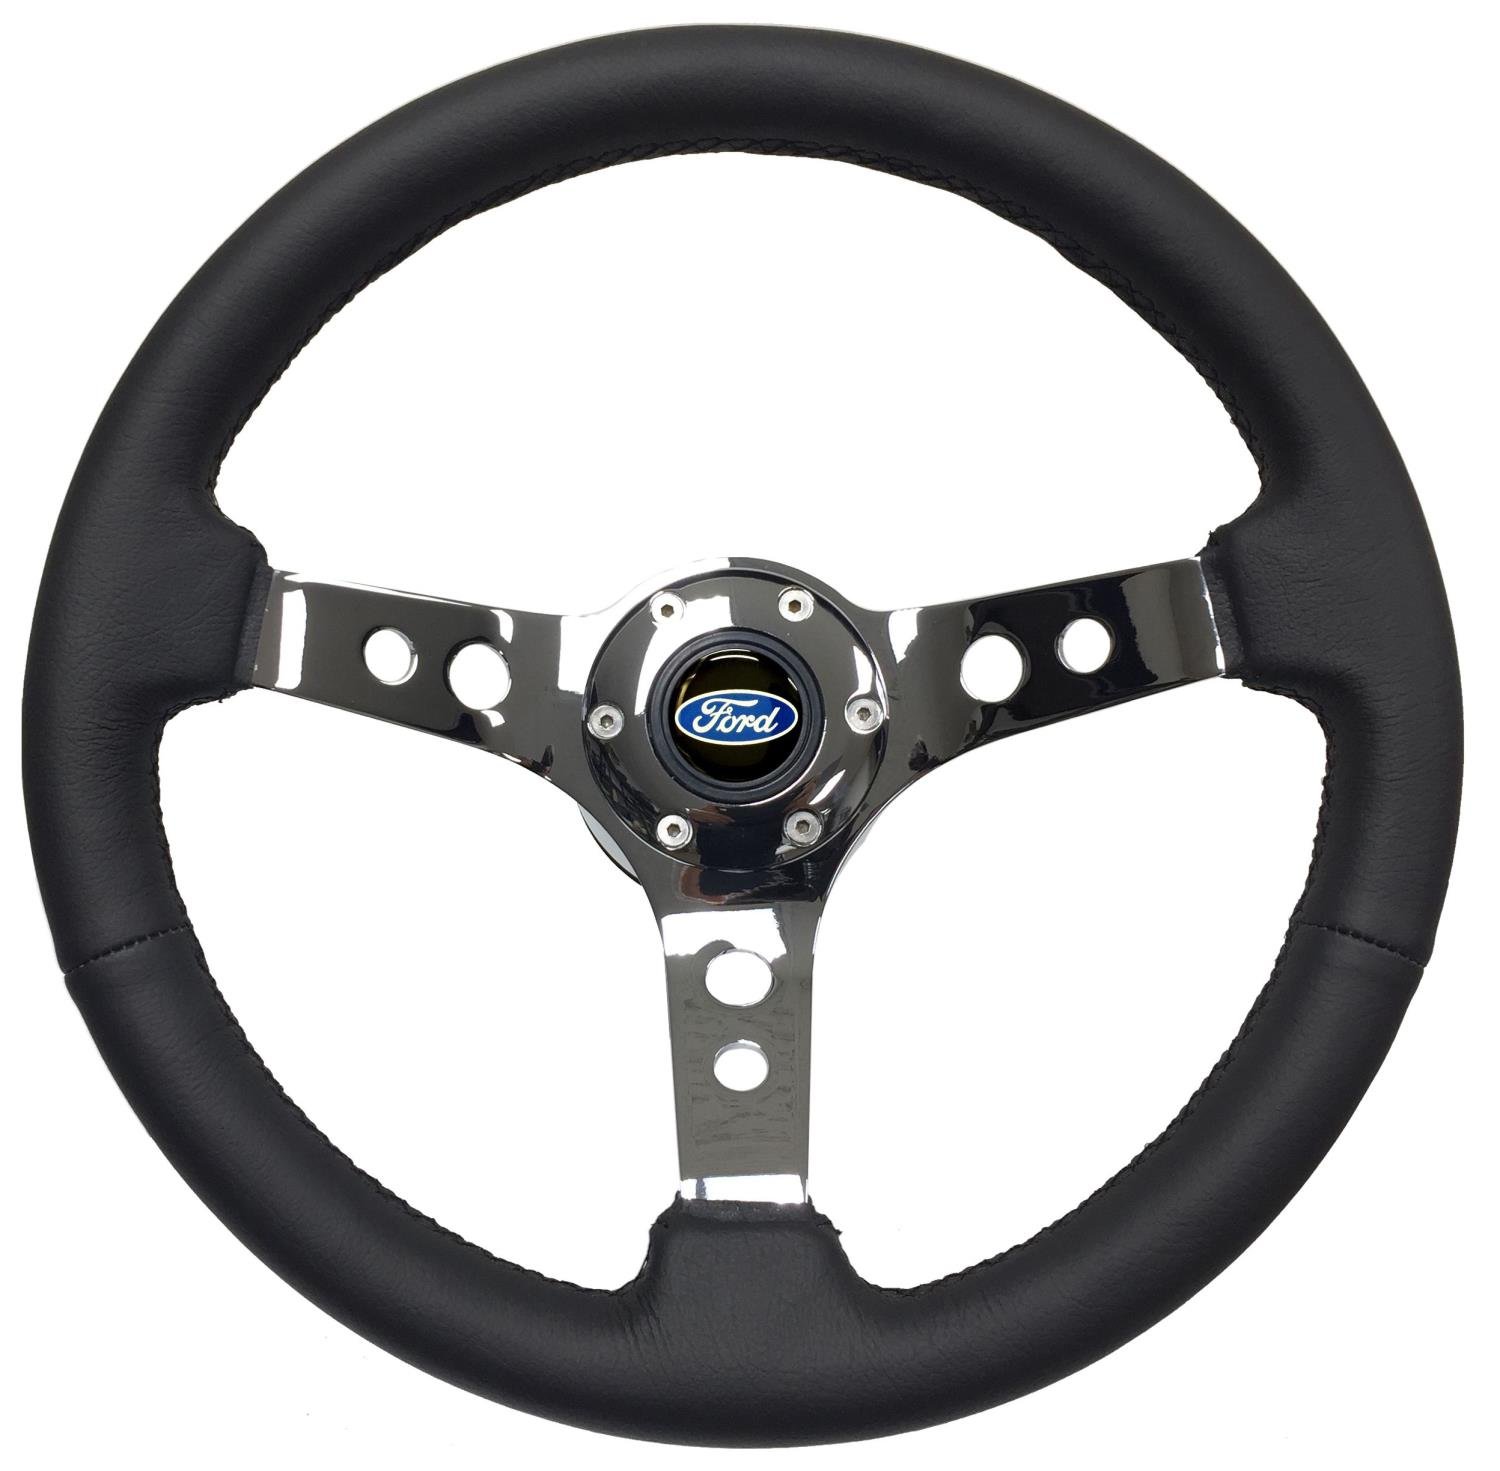 S6 Sport Steering Wheel Kit for 1968-1973 Ford/Mercury, 14 in. Diameter, Black Leather Grip, with 6-Bolt Adapter and Horn Button